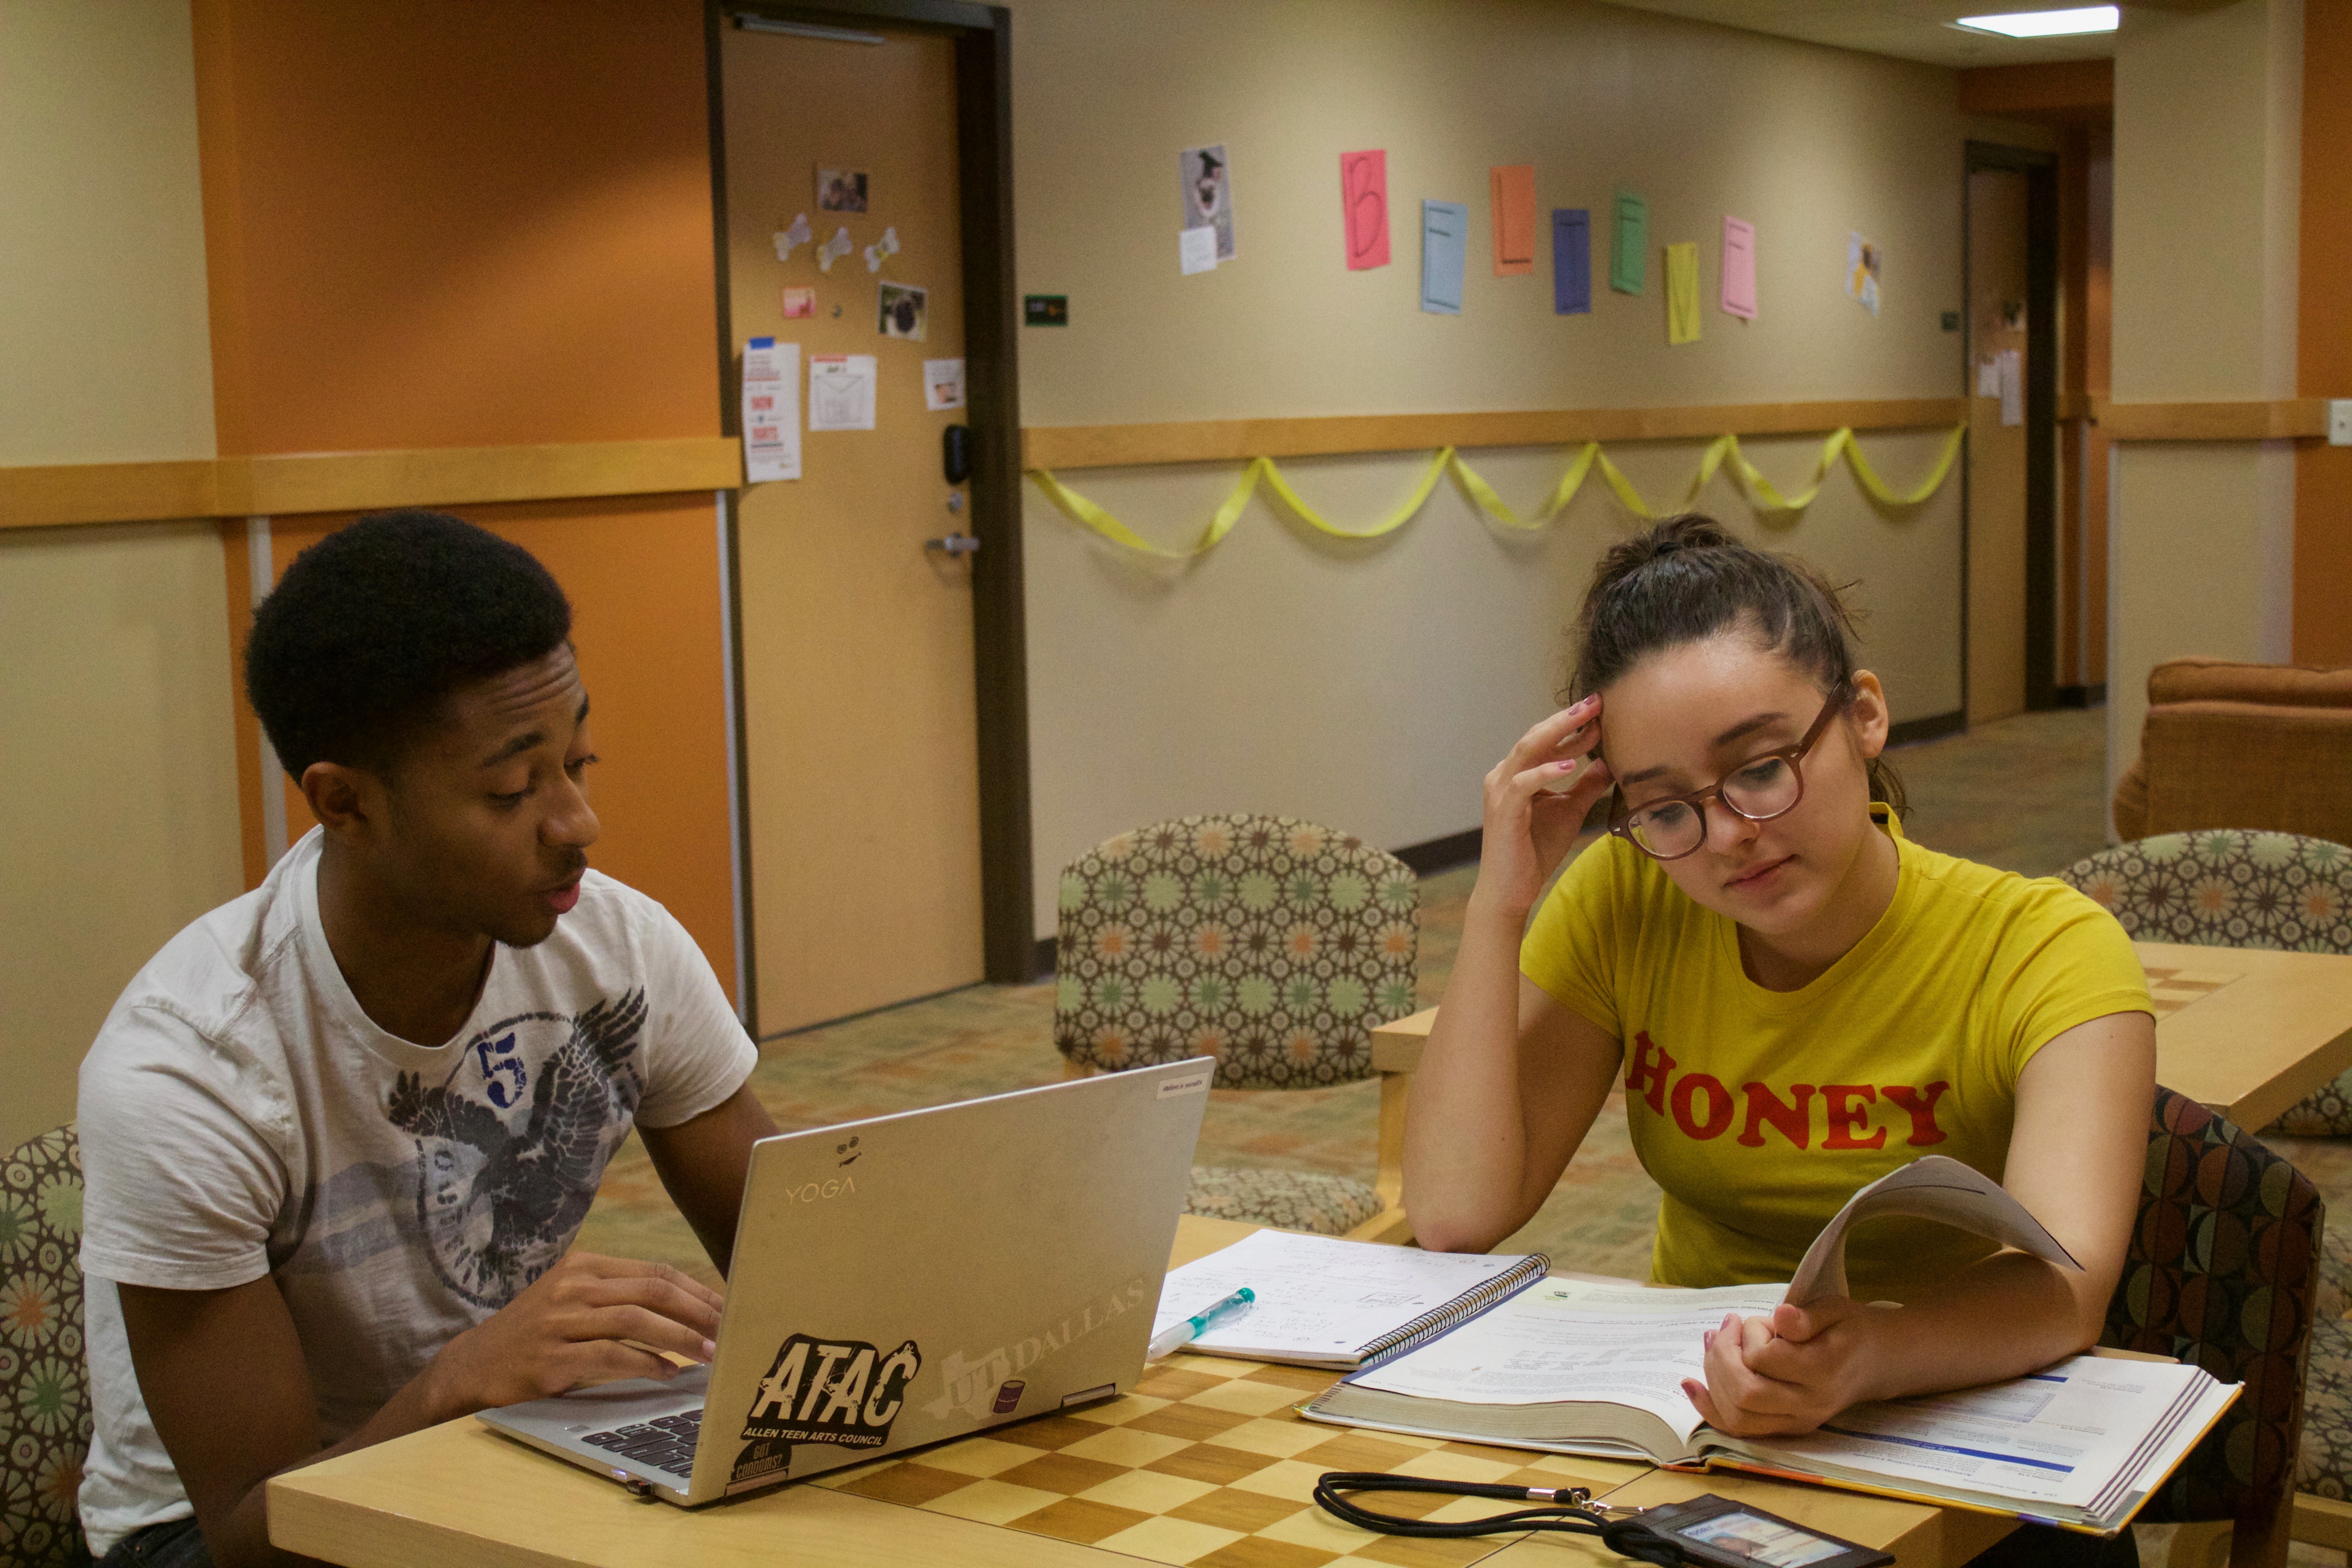 Program provides community for first-gen students